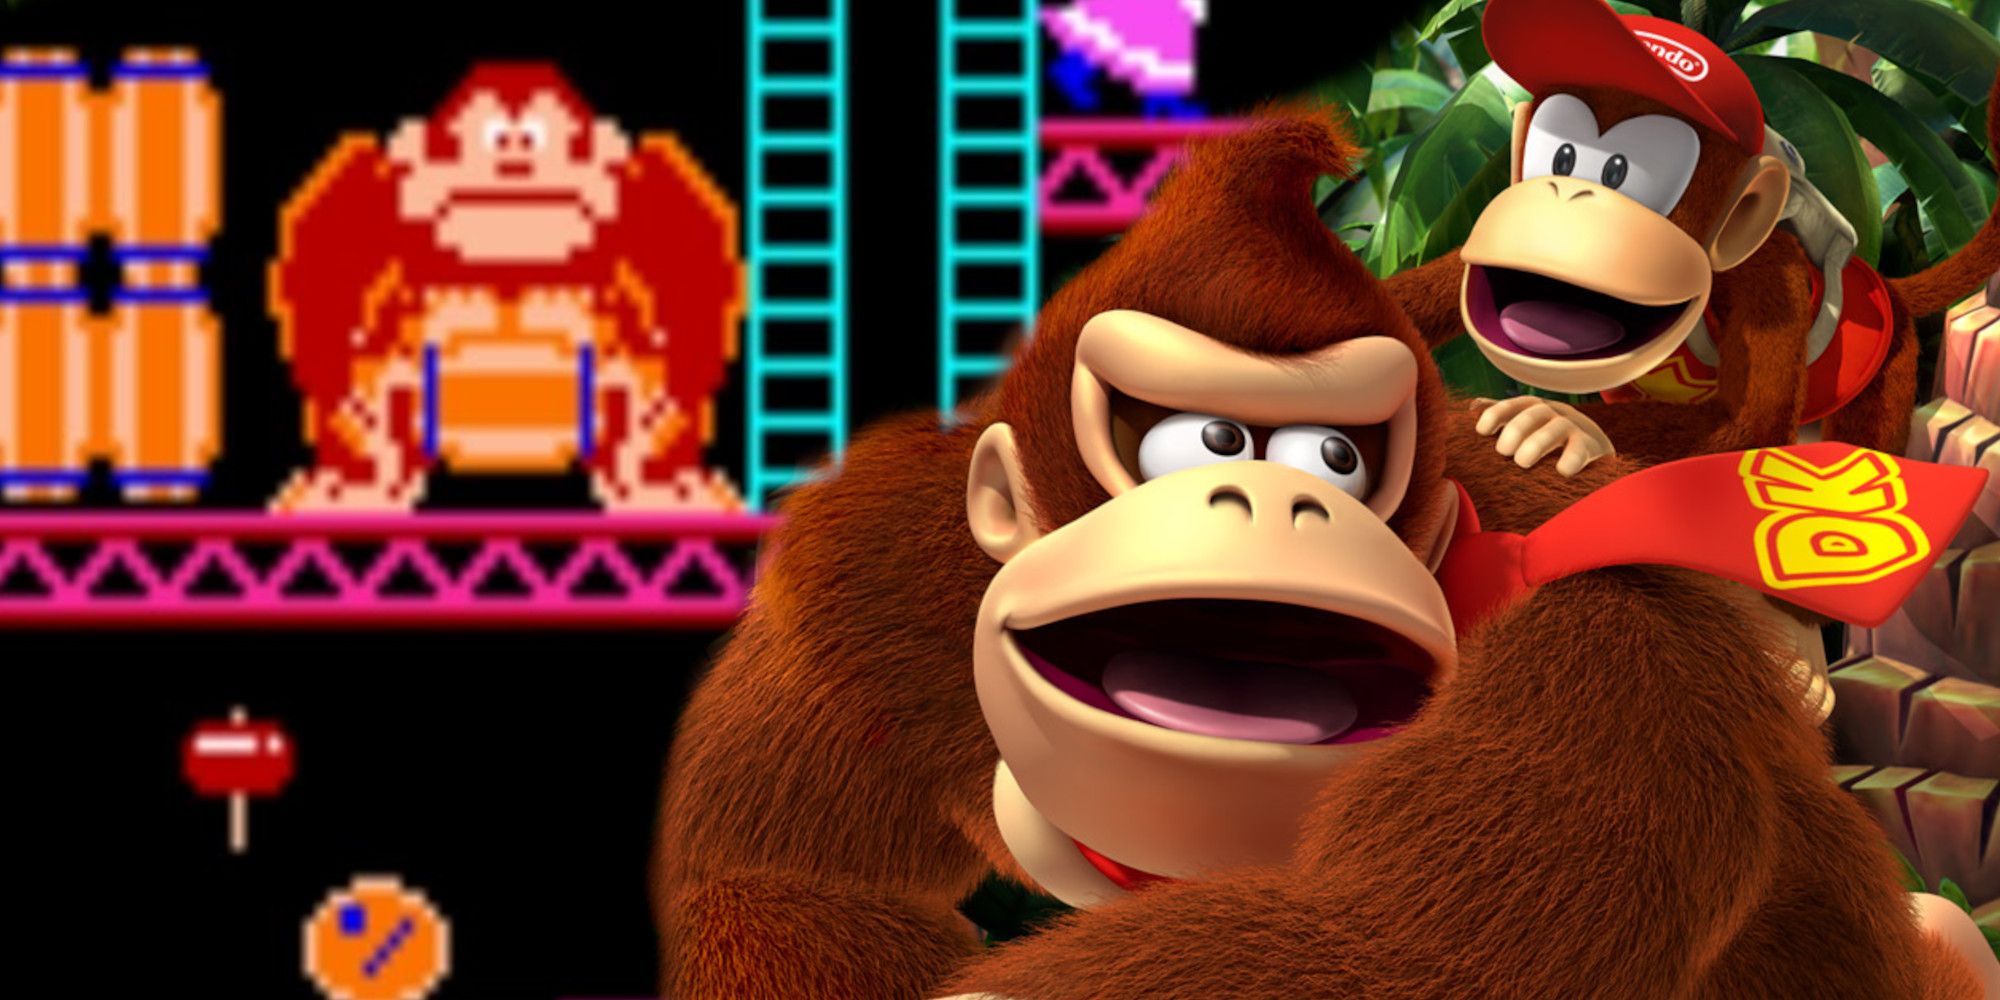 collage image of original Donkey Kong game with new Donkey and Diddy Kong